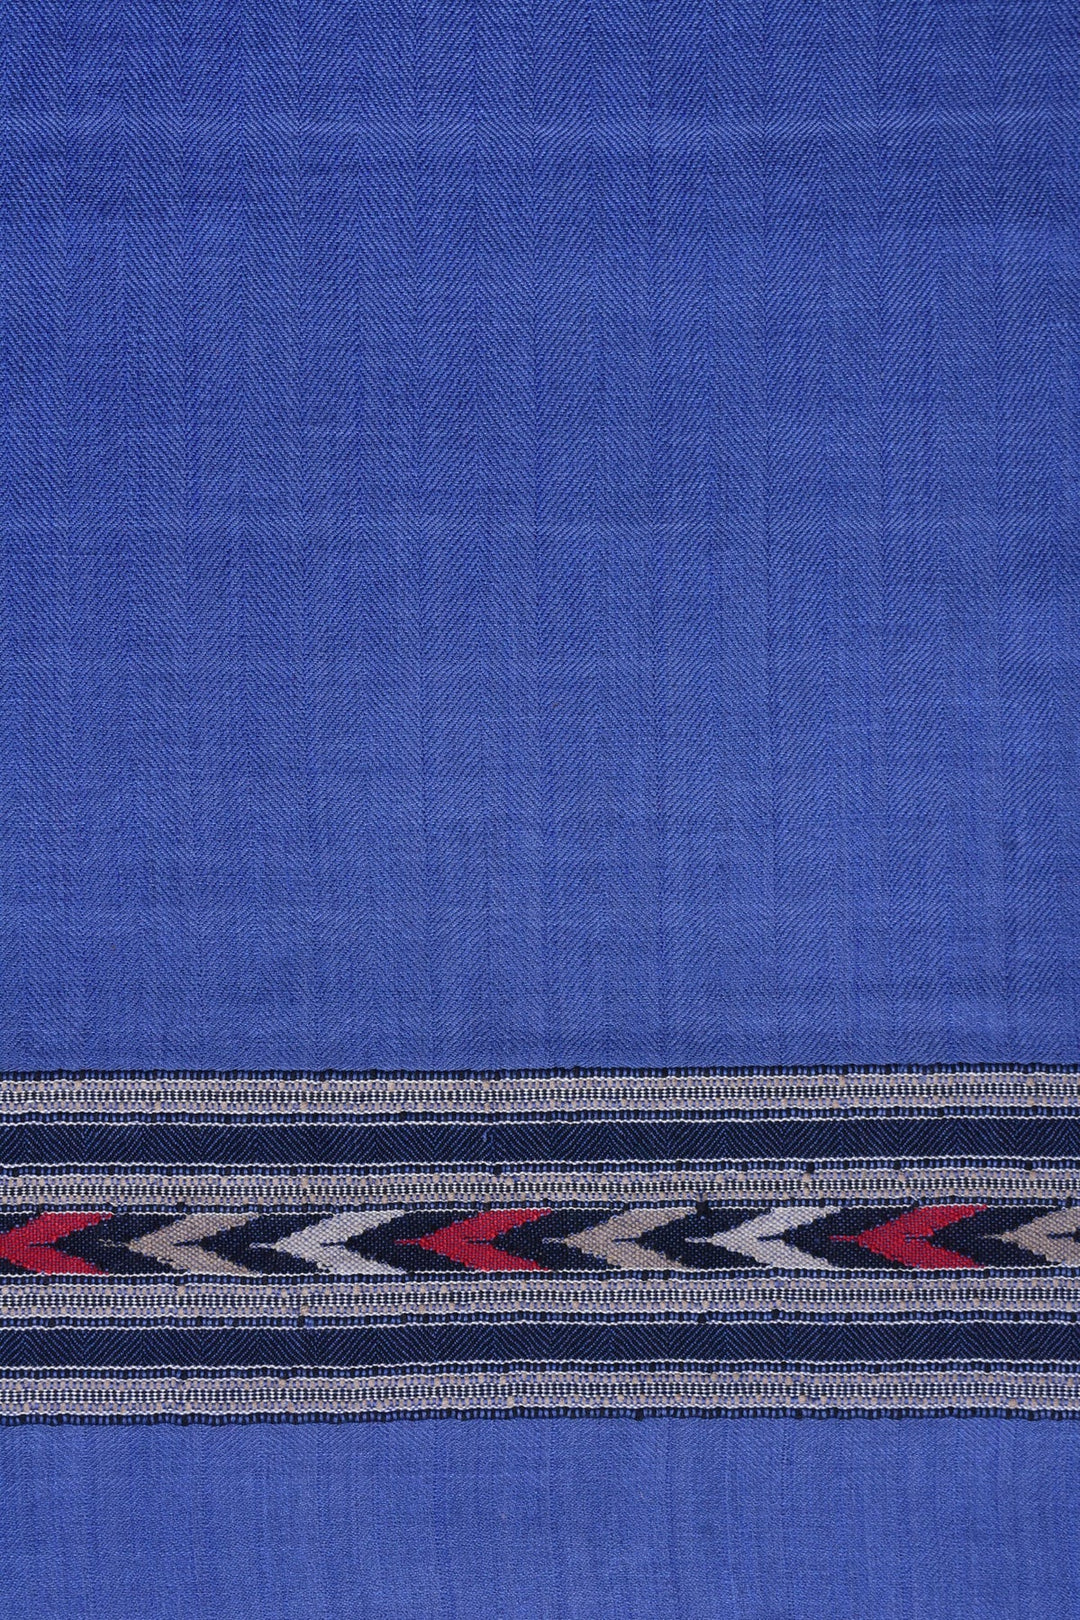 Blue Cashmere Stole with Hand Embroidery | Sisko Handwoven Soft Cashmere Stole - Blue